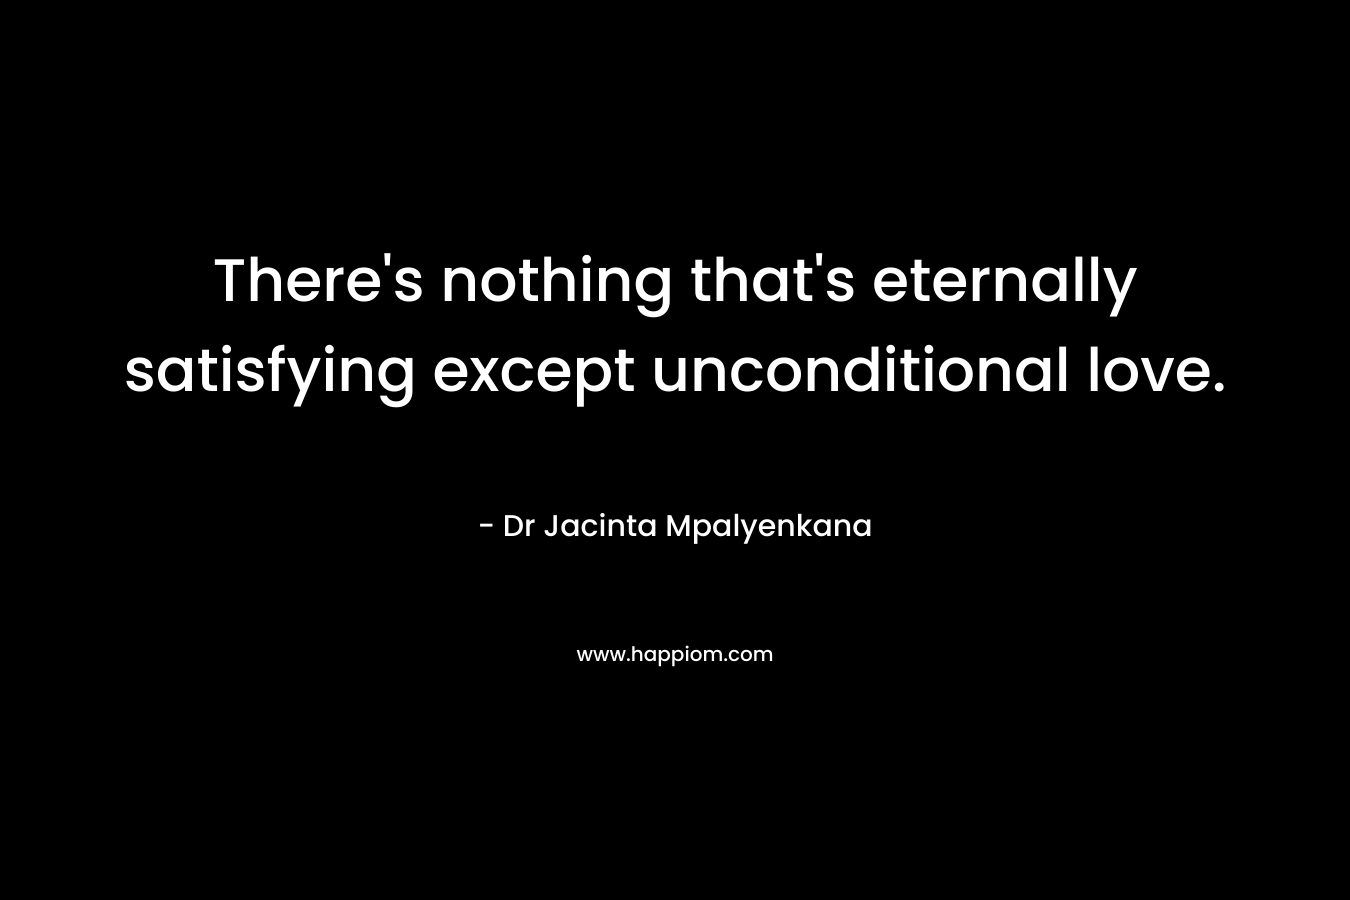 There's nothing that's eternally satisfying except unconditional love.